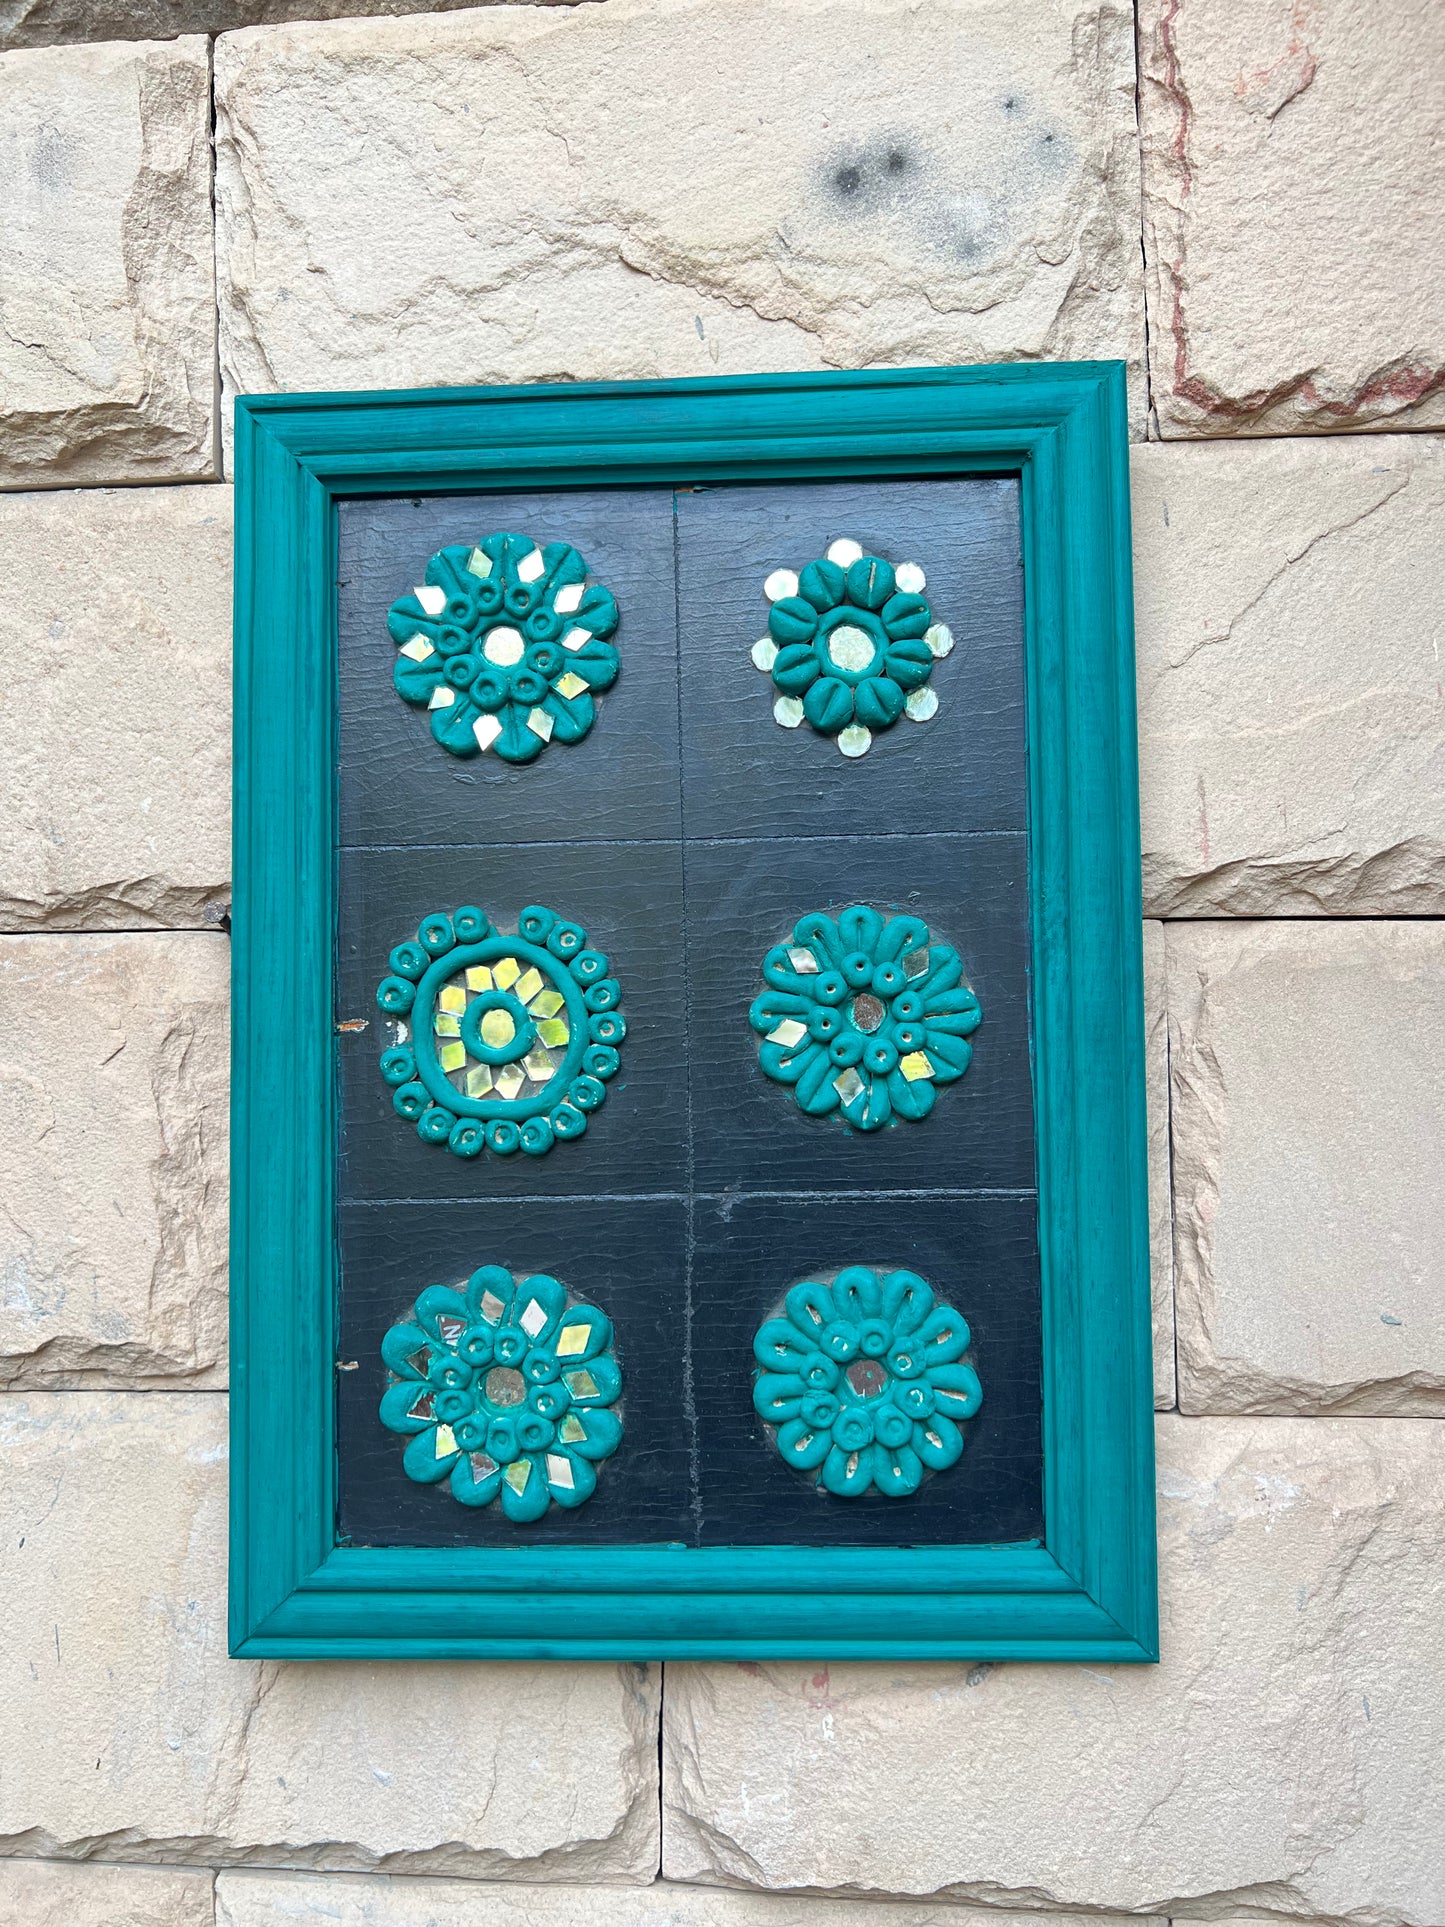 Image of Elegant and Traditional Turquoise Panel with Clay Work  The Source India is an Indian Handicraft, Home Decor, Furnishing and Textiles Store. Based out of Hauz Khas Village New Delhi, each piece is carefully procured to allow the enhancement of India's Culture.